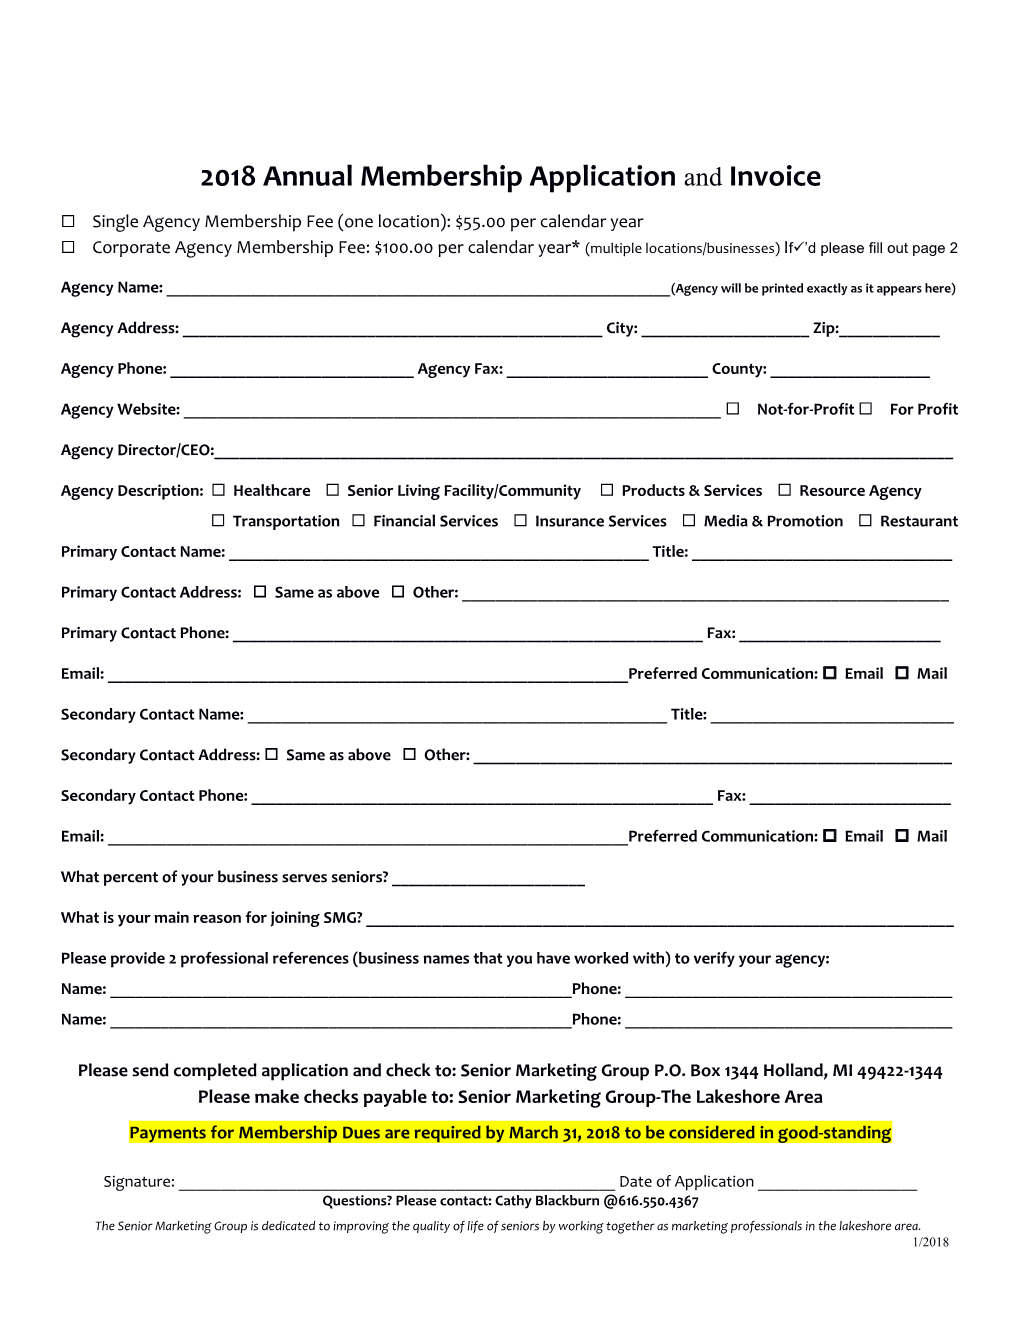 2018 Annual Membership Application and Invoice